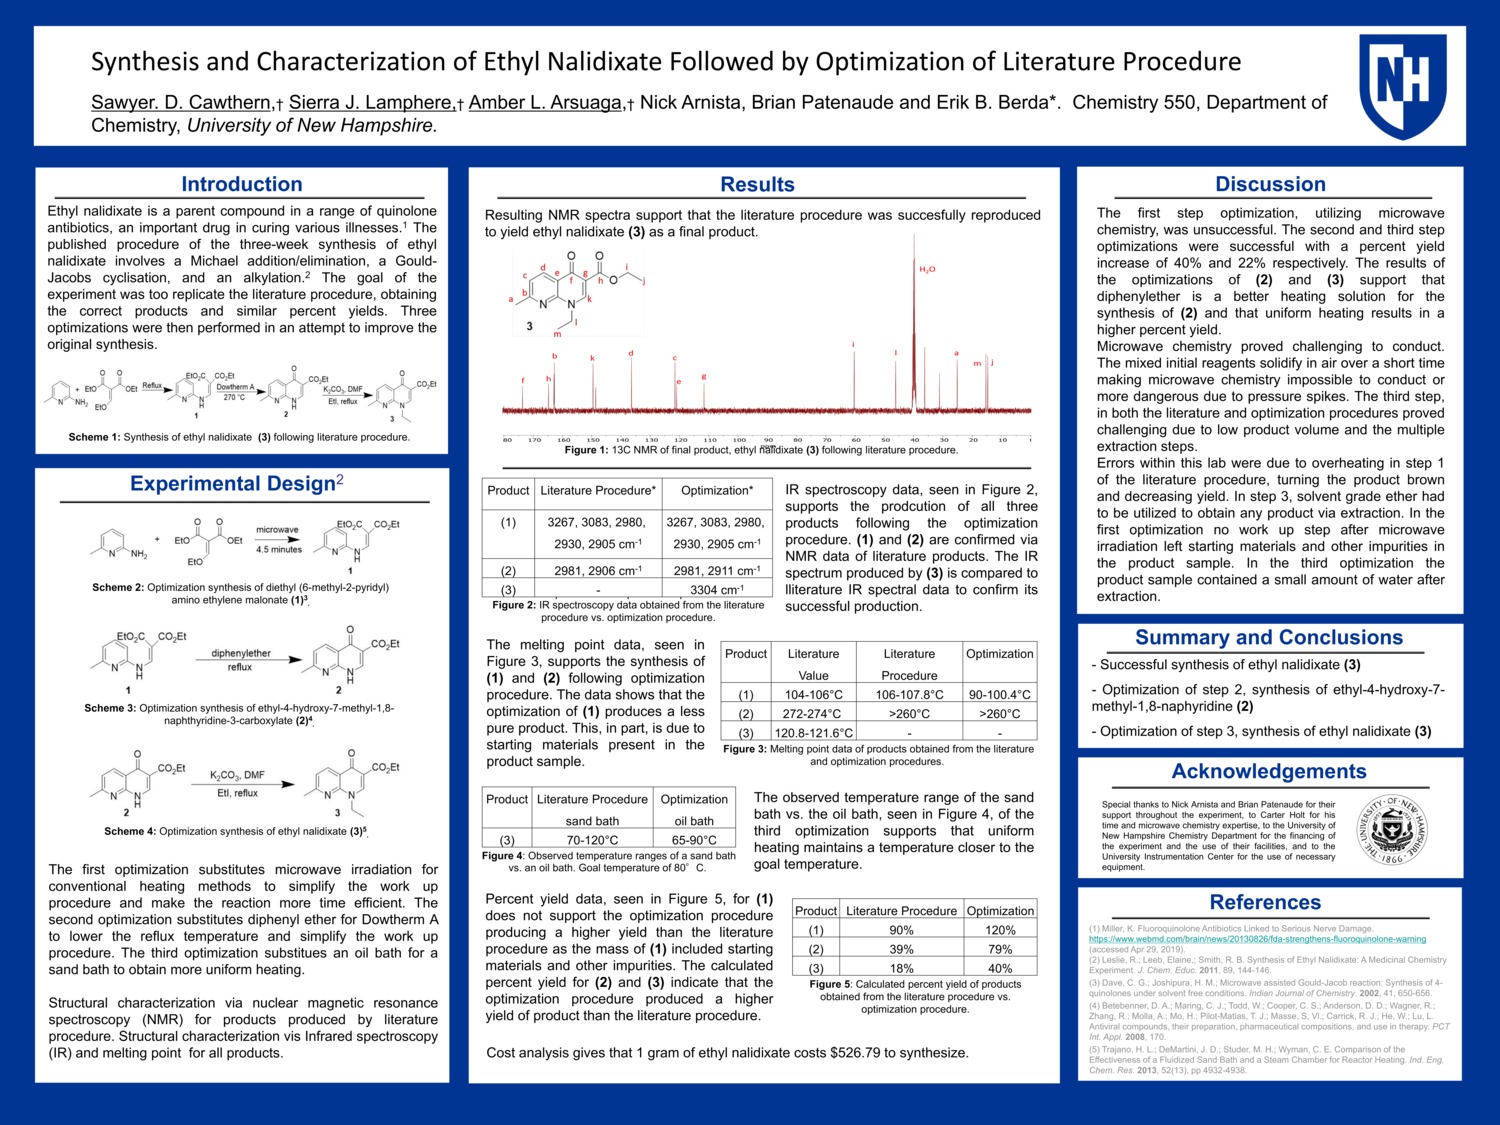 Synthesis And Characterization Of Ethyl Nalidixate Followed By Optimization Of Literature Procedure by sdc1015